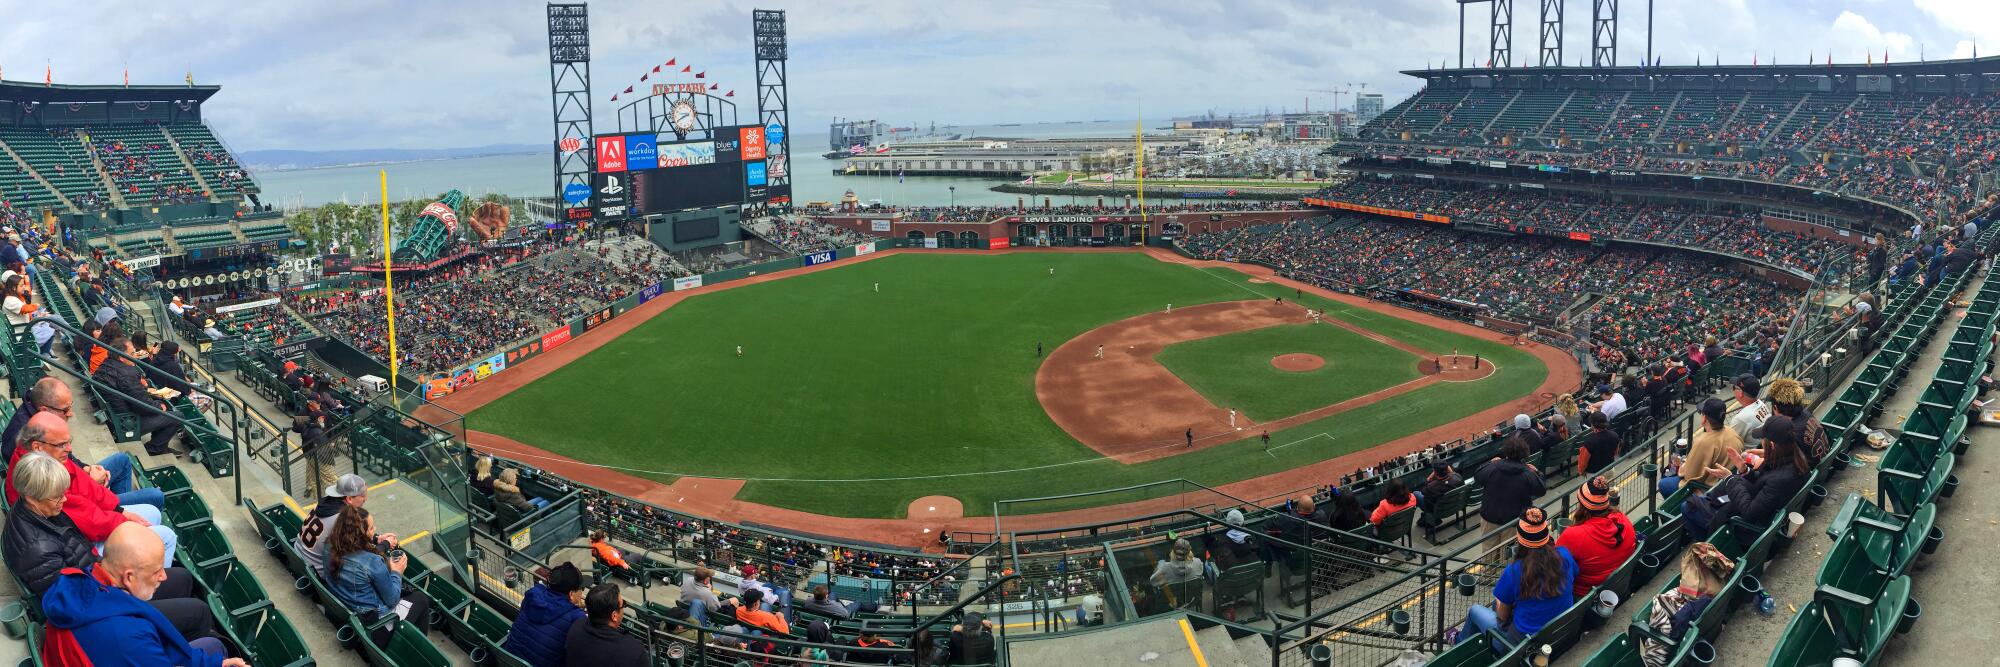 AT&T Park, San Francisco, with a view from the stands among attendees looking down on the baseball field and nearby bay.